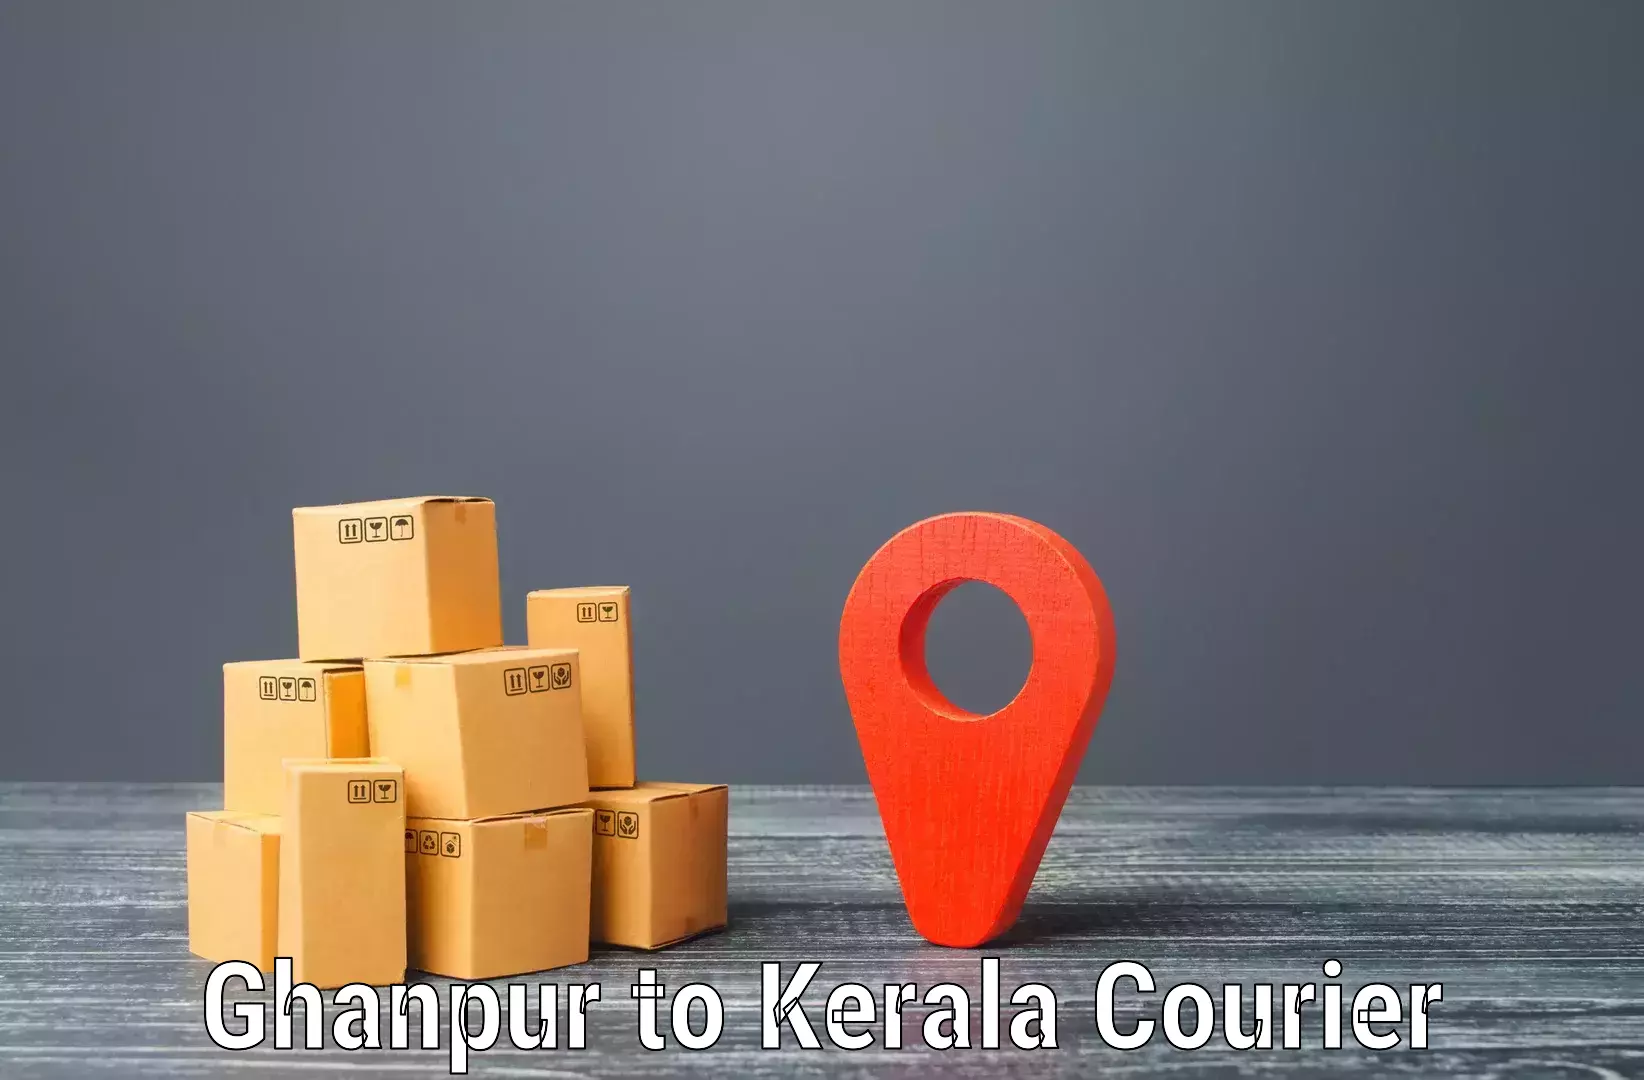 Express delivery network Ghanpur to Pathanamthitta